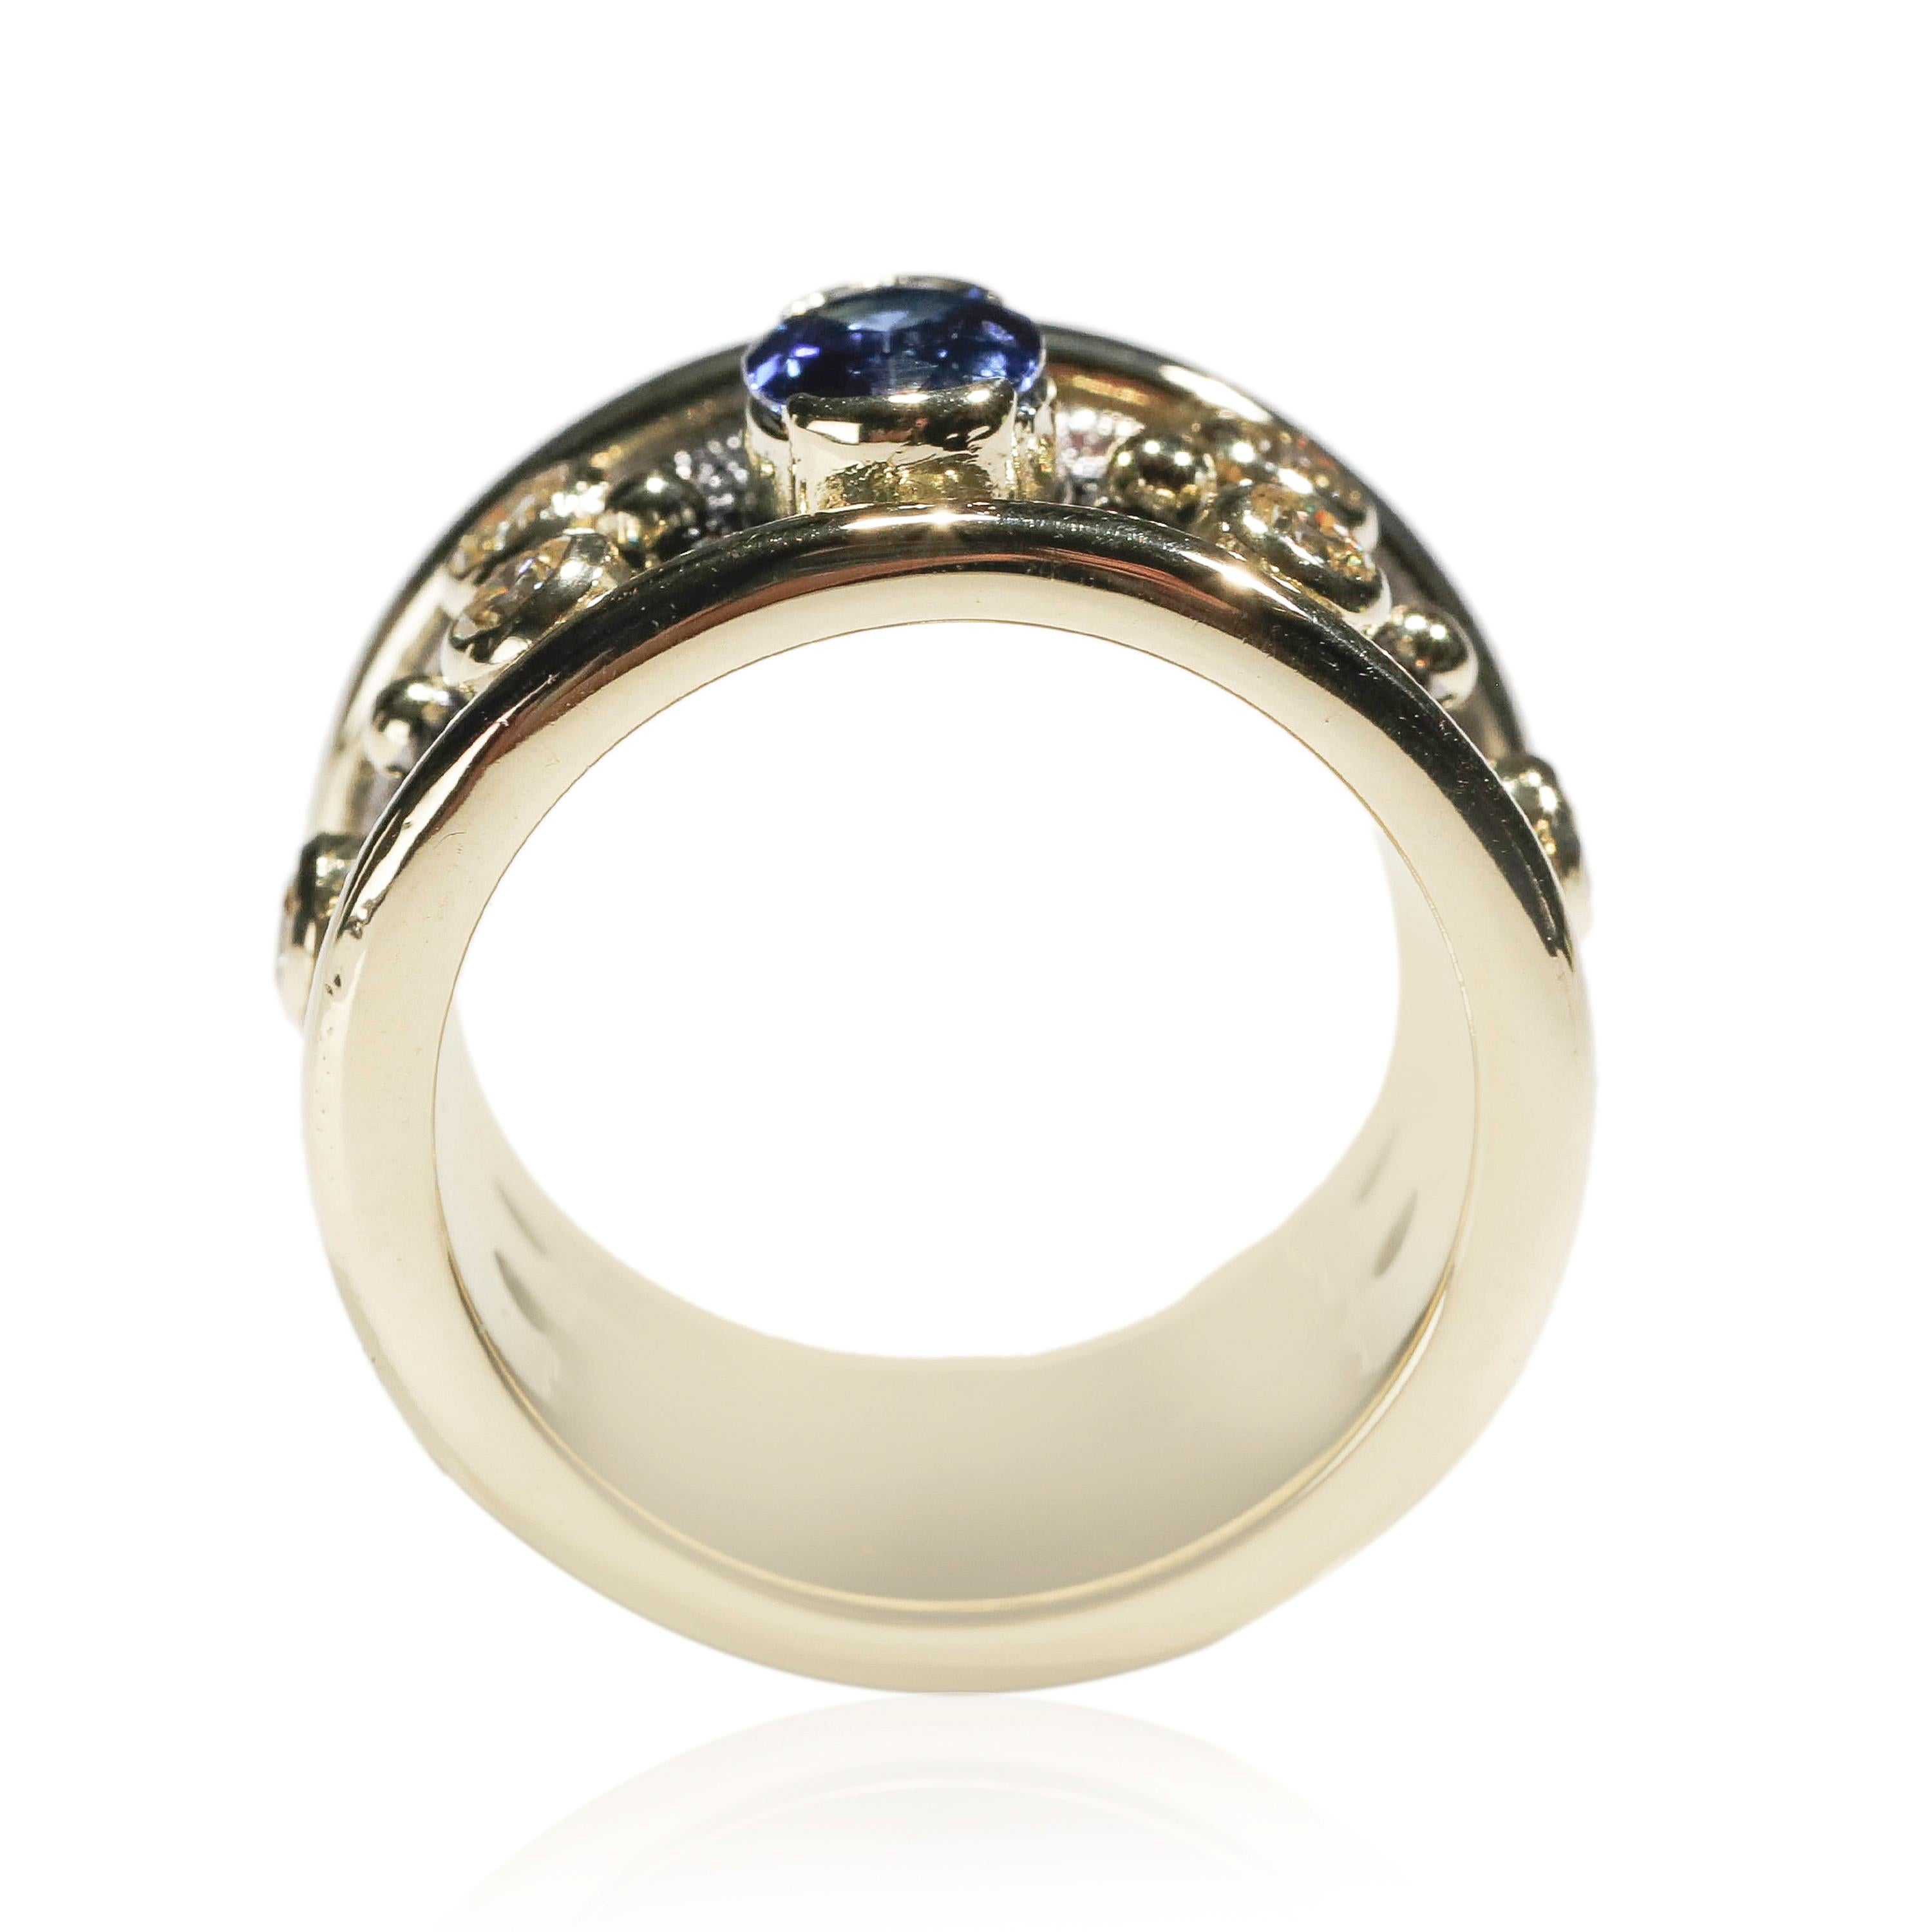 Oval Sapphire 1 Ct Diamond 18k Yellow Gold Cigar Band Ring US Size 6

Crafted in 18 kt Yellow Gold, this Unique design showcases a white Diamond 1 TCW Round-shaped diamonds, set in yellow gold, fine oval shape mesmerizing 0.5 ct sapphire, Polished